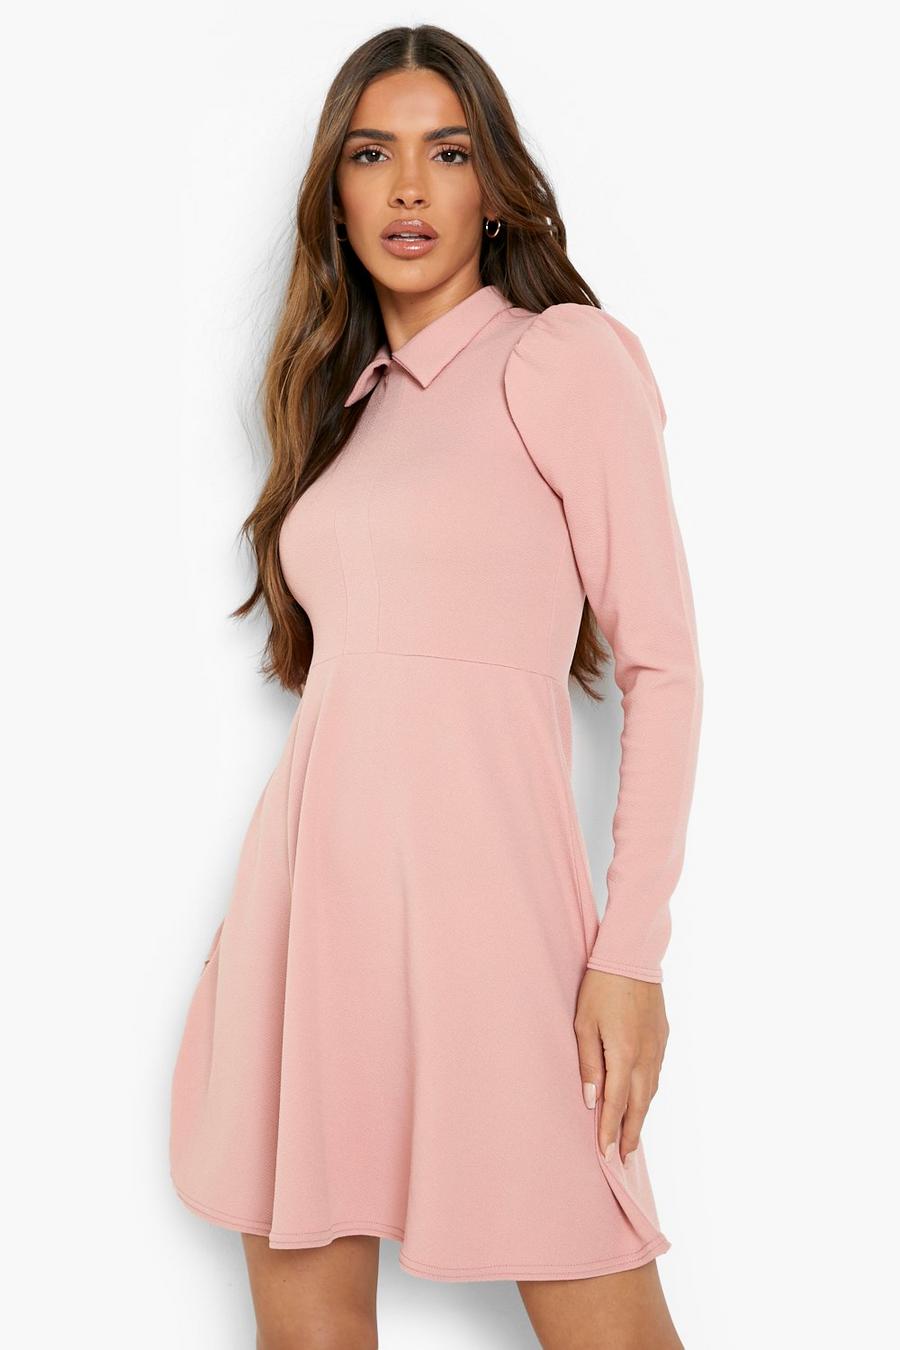 Dusty rose pink Long Sleeve Collared Skater Dress image number 1